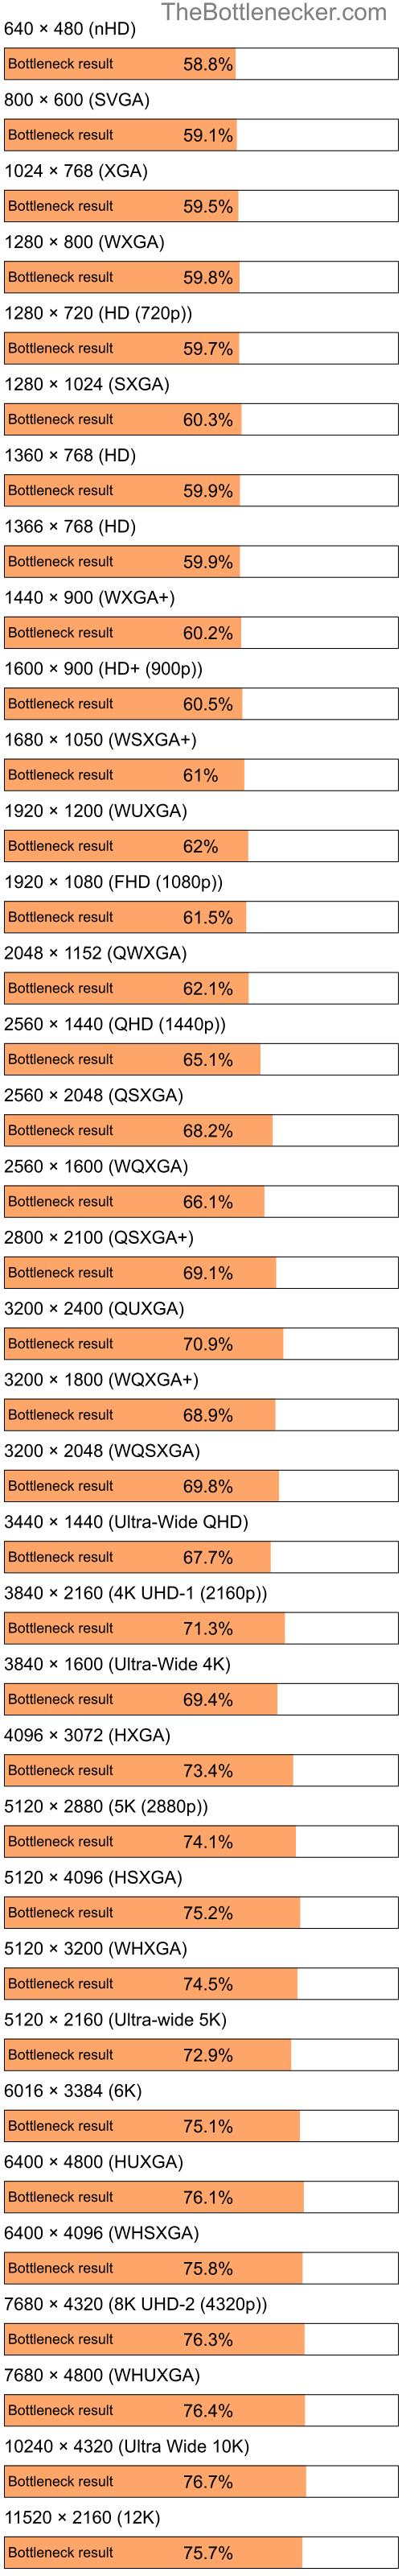 Bottleneck results by resolution for Intel Pentium 4 and AMD Radeon HD 6250 in General Tasks